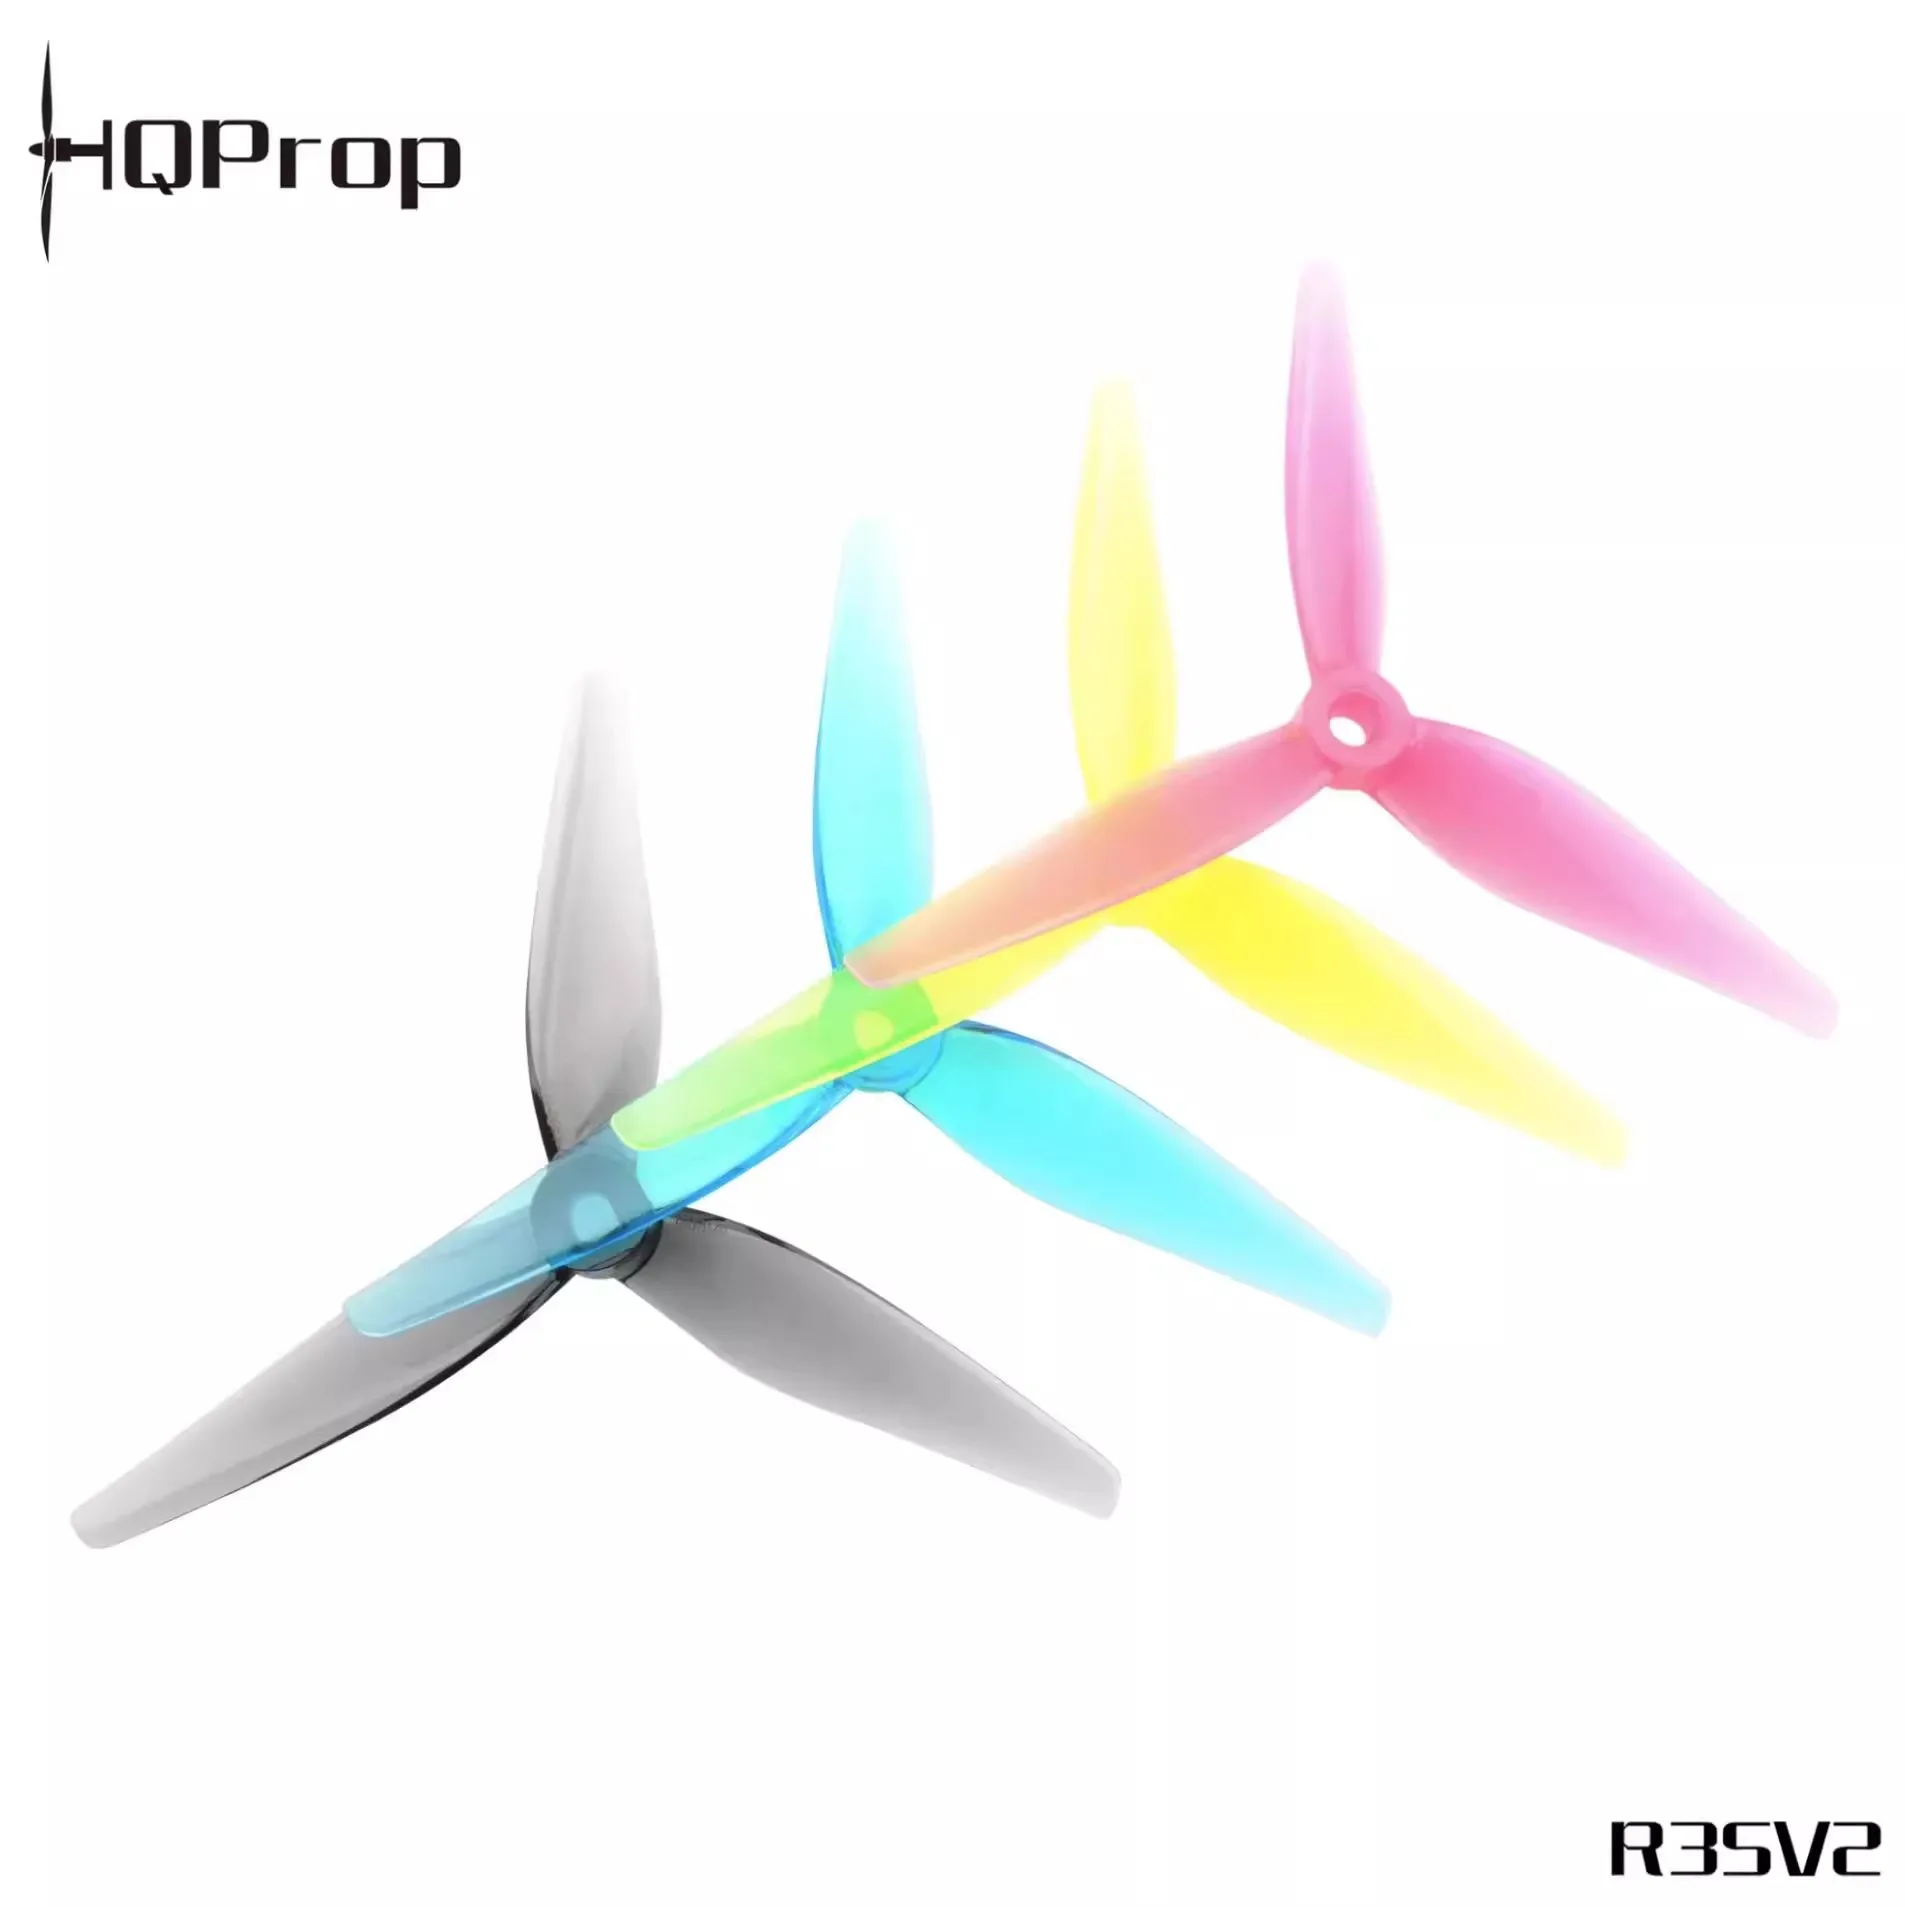 

8PCS/4CW 4CCW HQProp 5135 V2 R35V2 Poly Carbonate 5Inch 5.1X3.5X3 3-Blade propeller compatible GEPRE TBS FPV Racing Drone